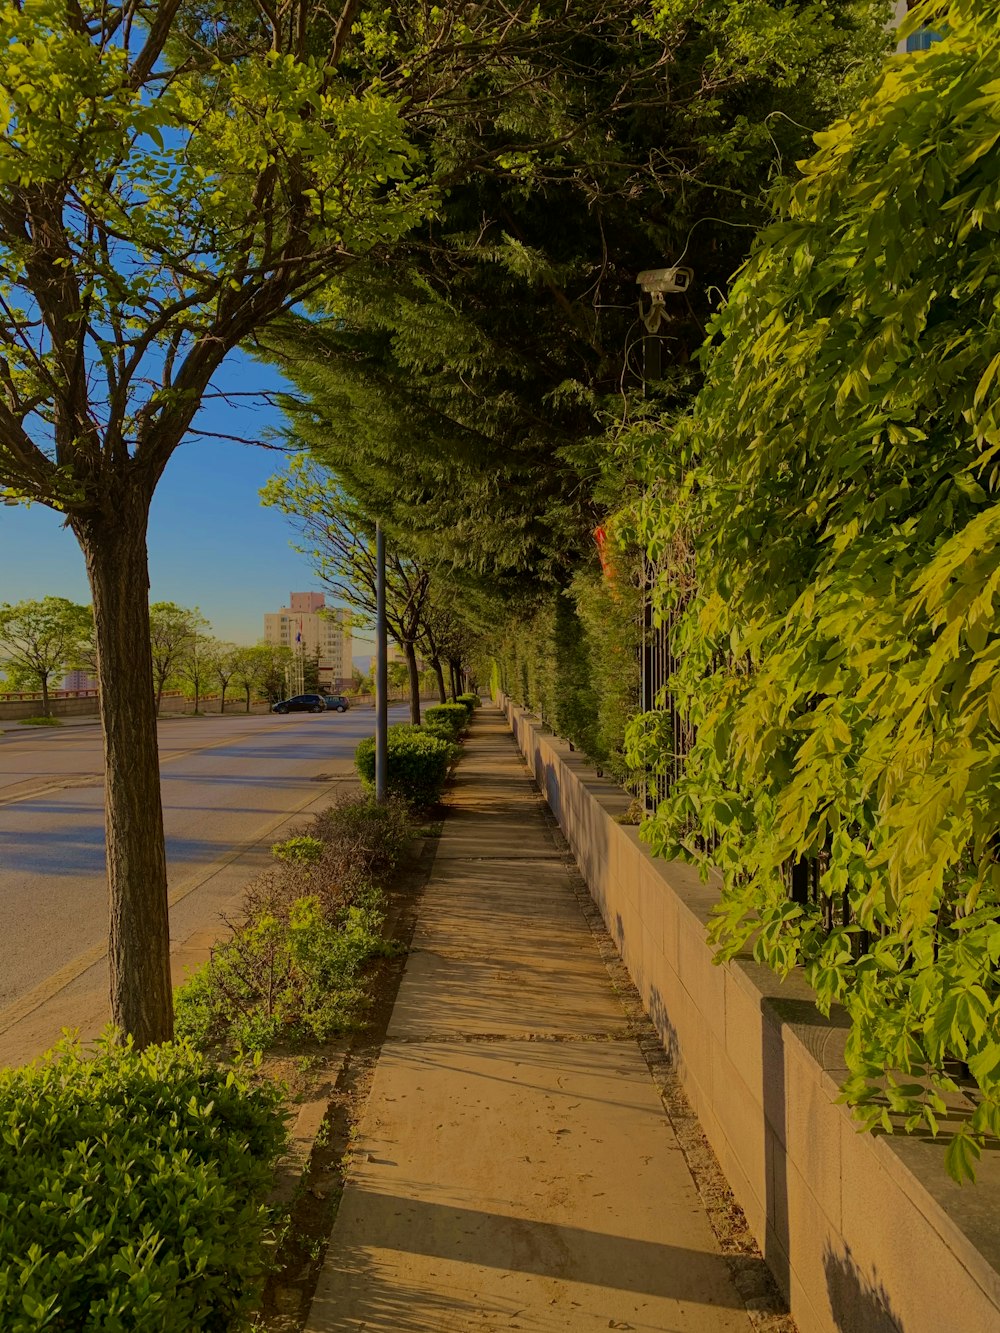 a sidewalk with trees on the side